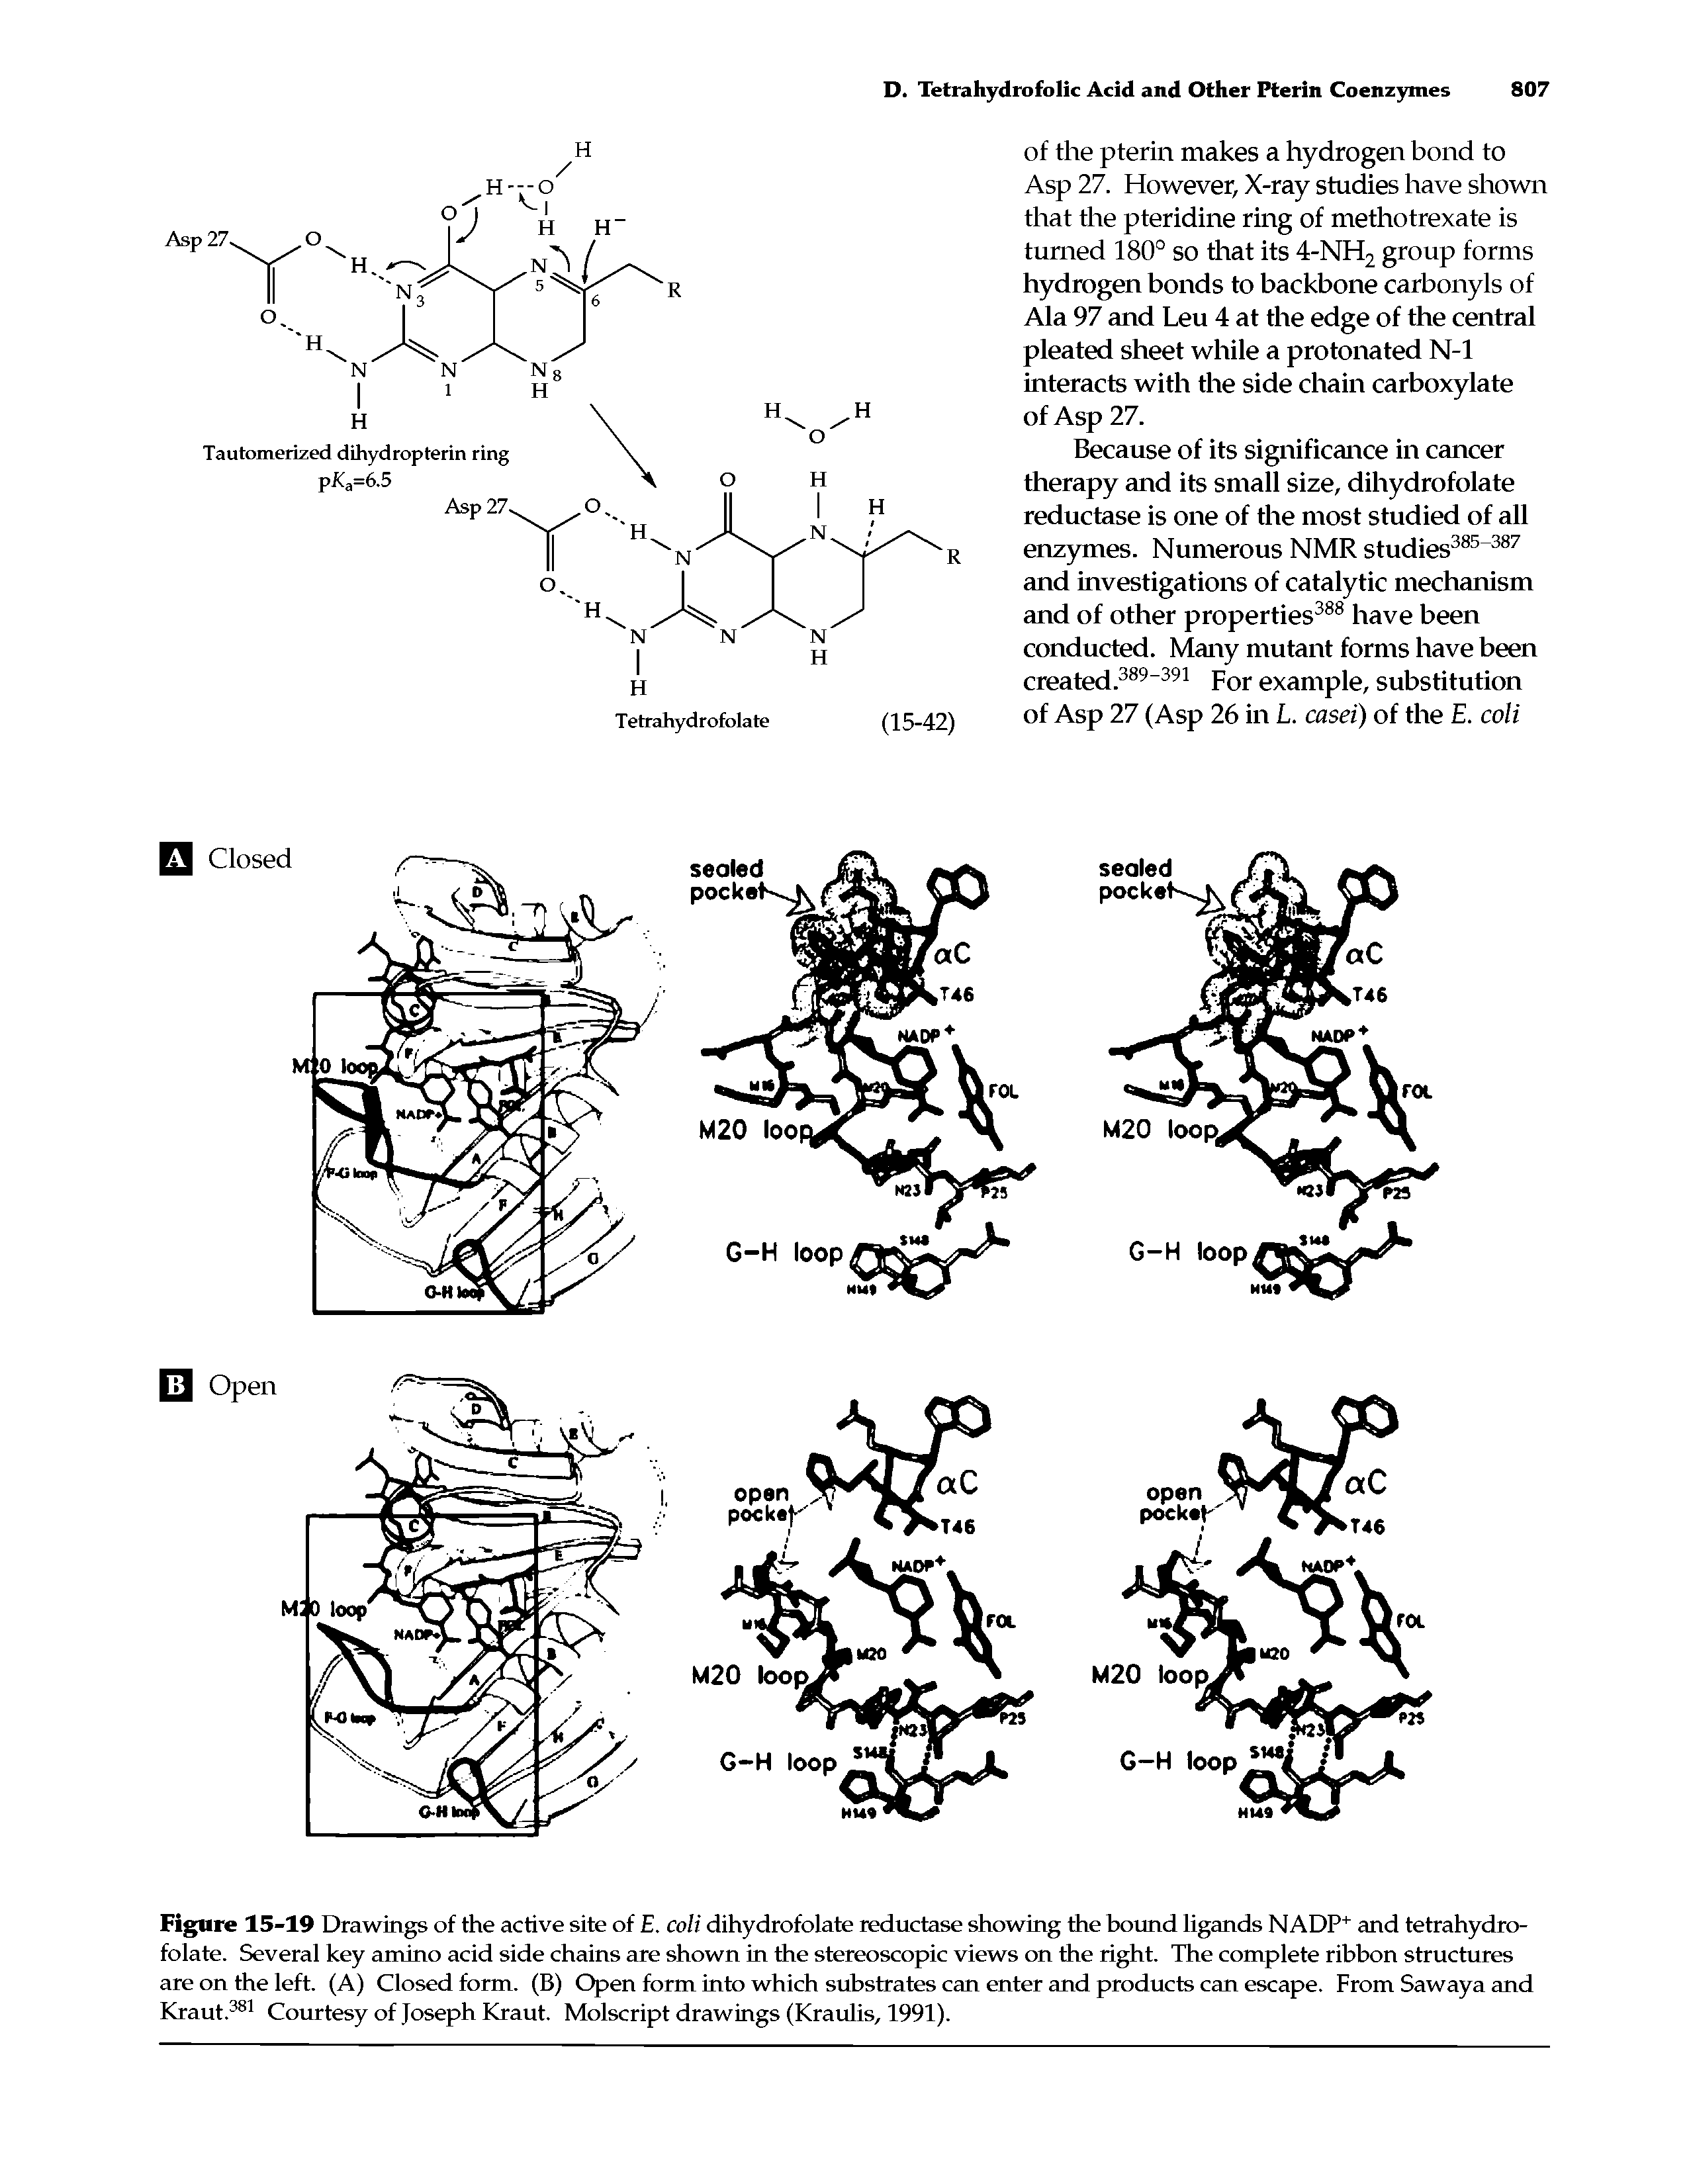 Figure 15-19 Drawings of the active site of E. coli dihydrofolate reductase showing the hound ligands NADP+ and tetrahydrofolate. Several key amino acid side chains are shown in the stereoscopic views on the right. The complete ribbon structures are on the left. (A) Closed form. (B) Open form into which substrates can enter and products can escape. From Sawaya and Kraut.381 Courtesy of Joseph Kraut. Molscript drawings (Kraulis, 1991).